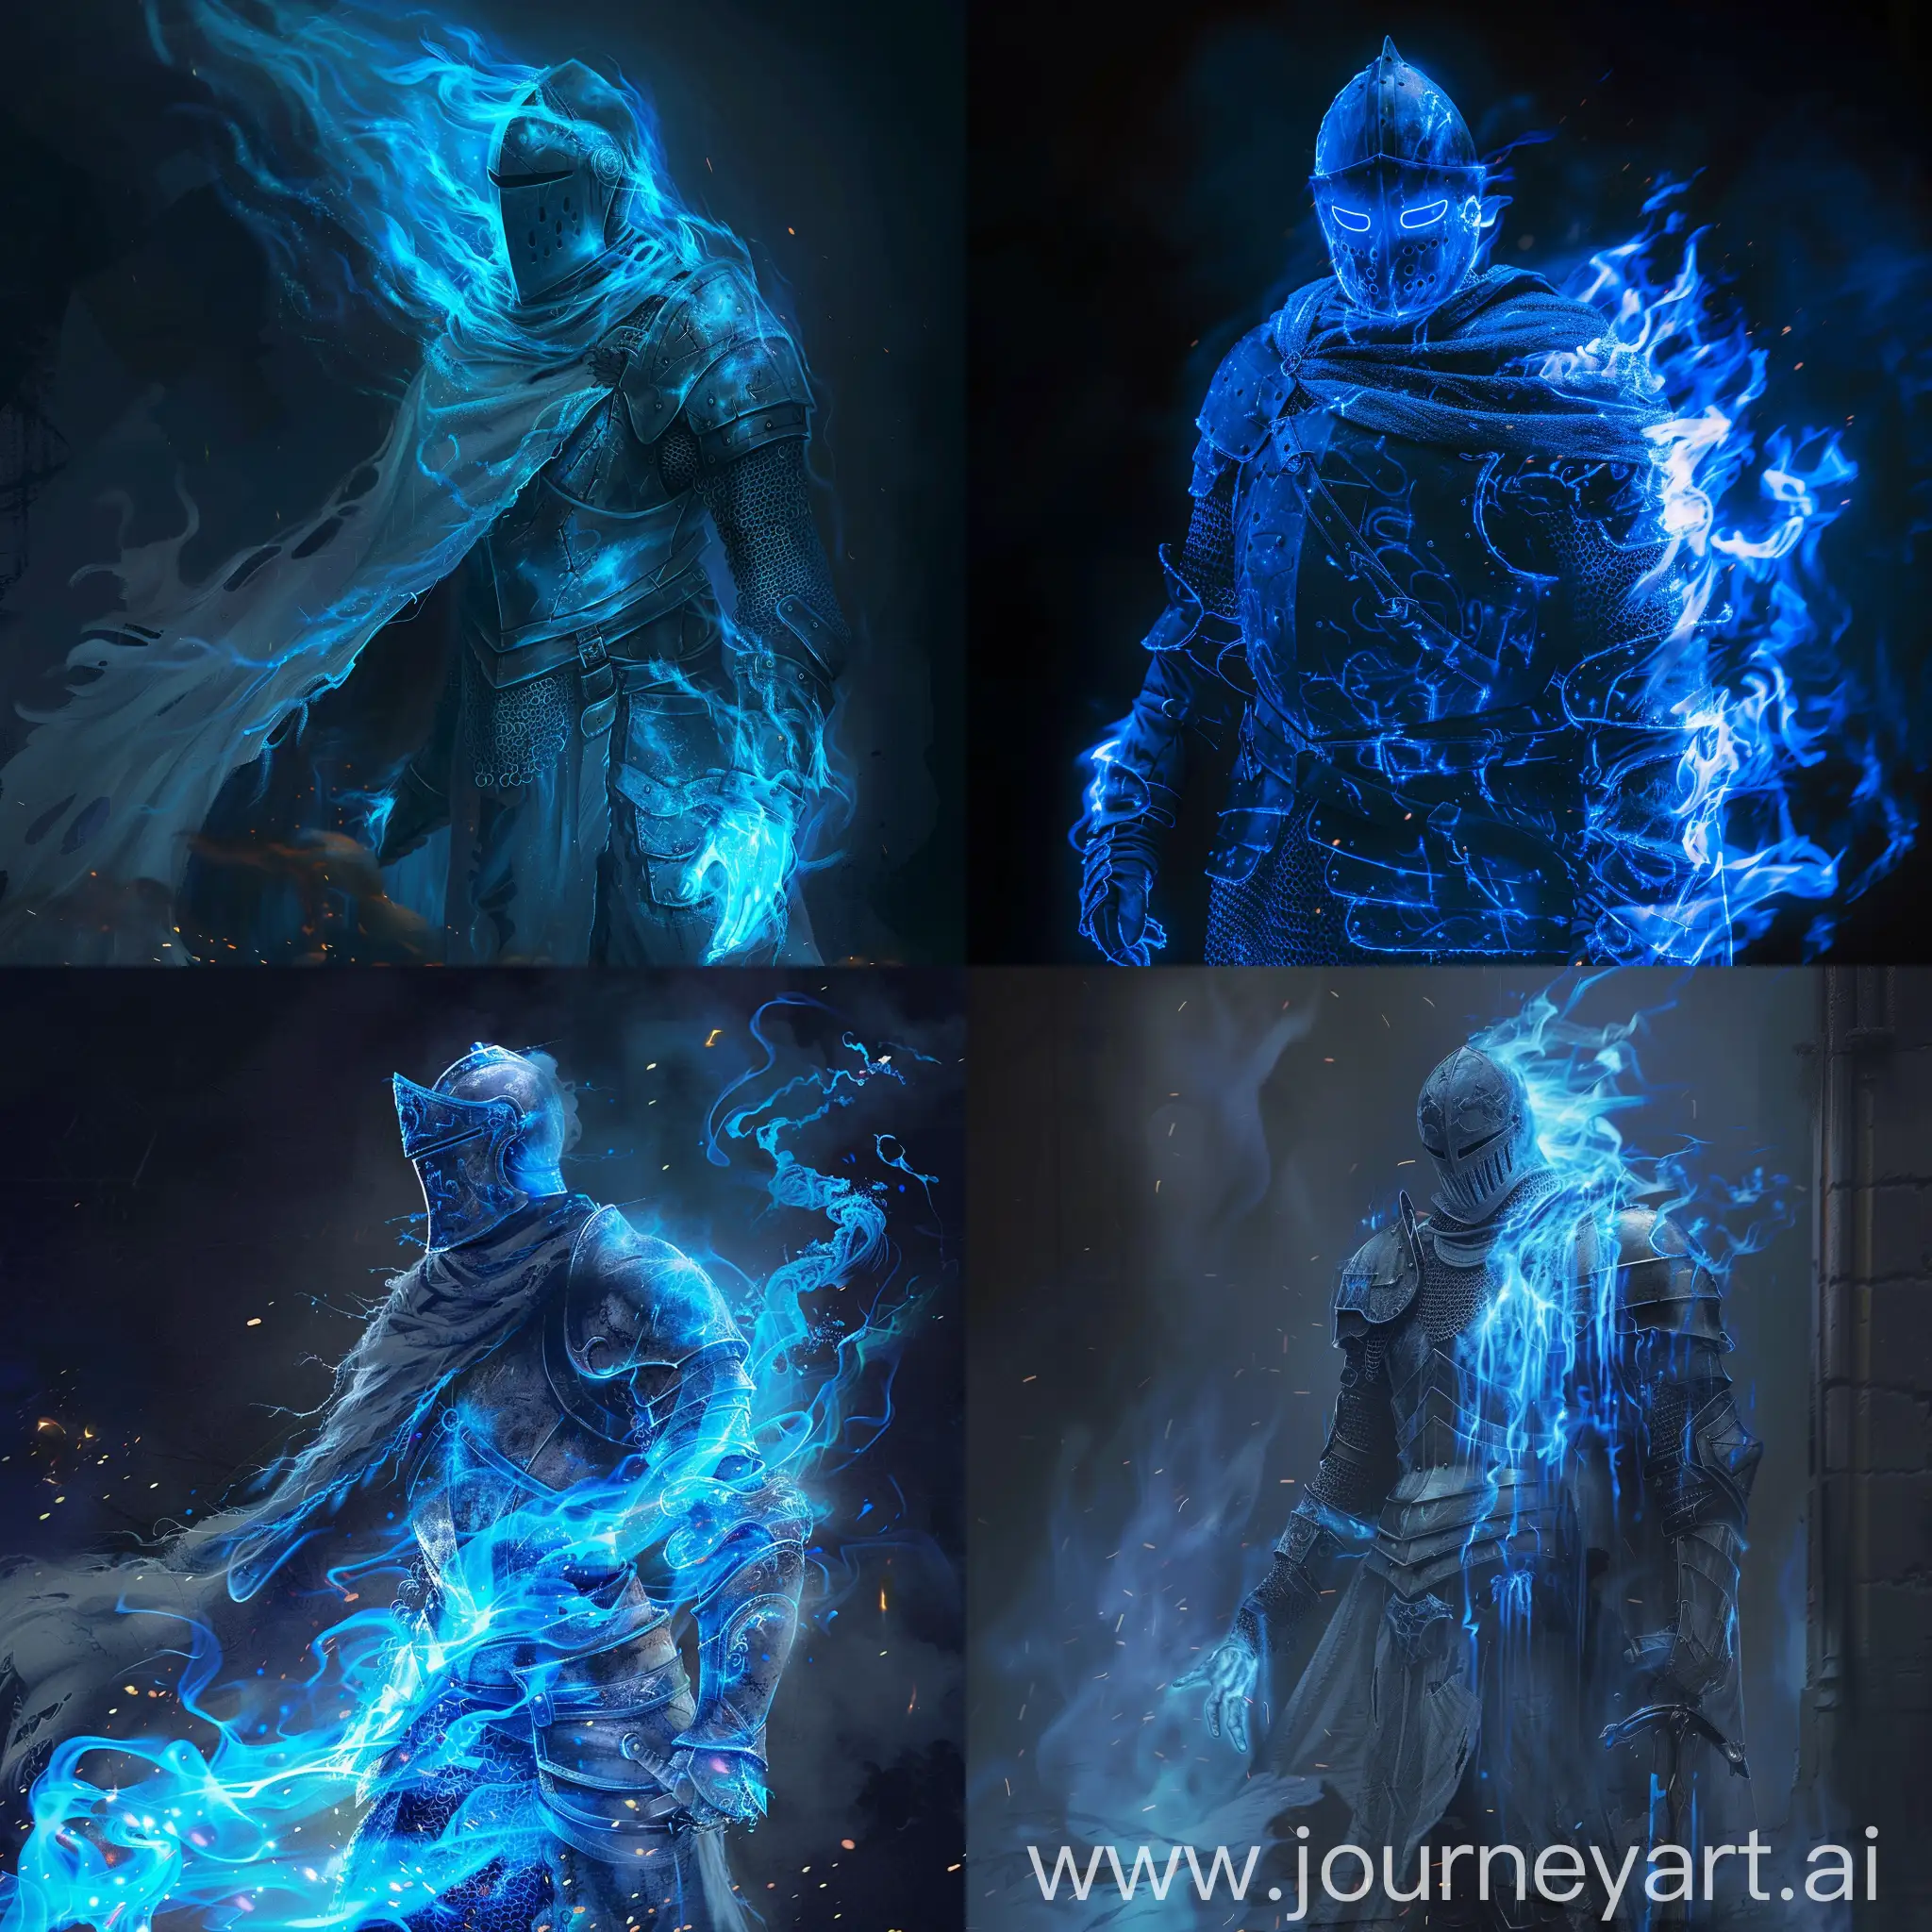  Disembodied ghost of a knight glowing with blue fire